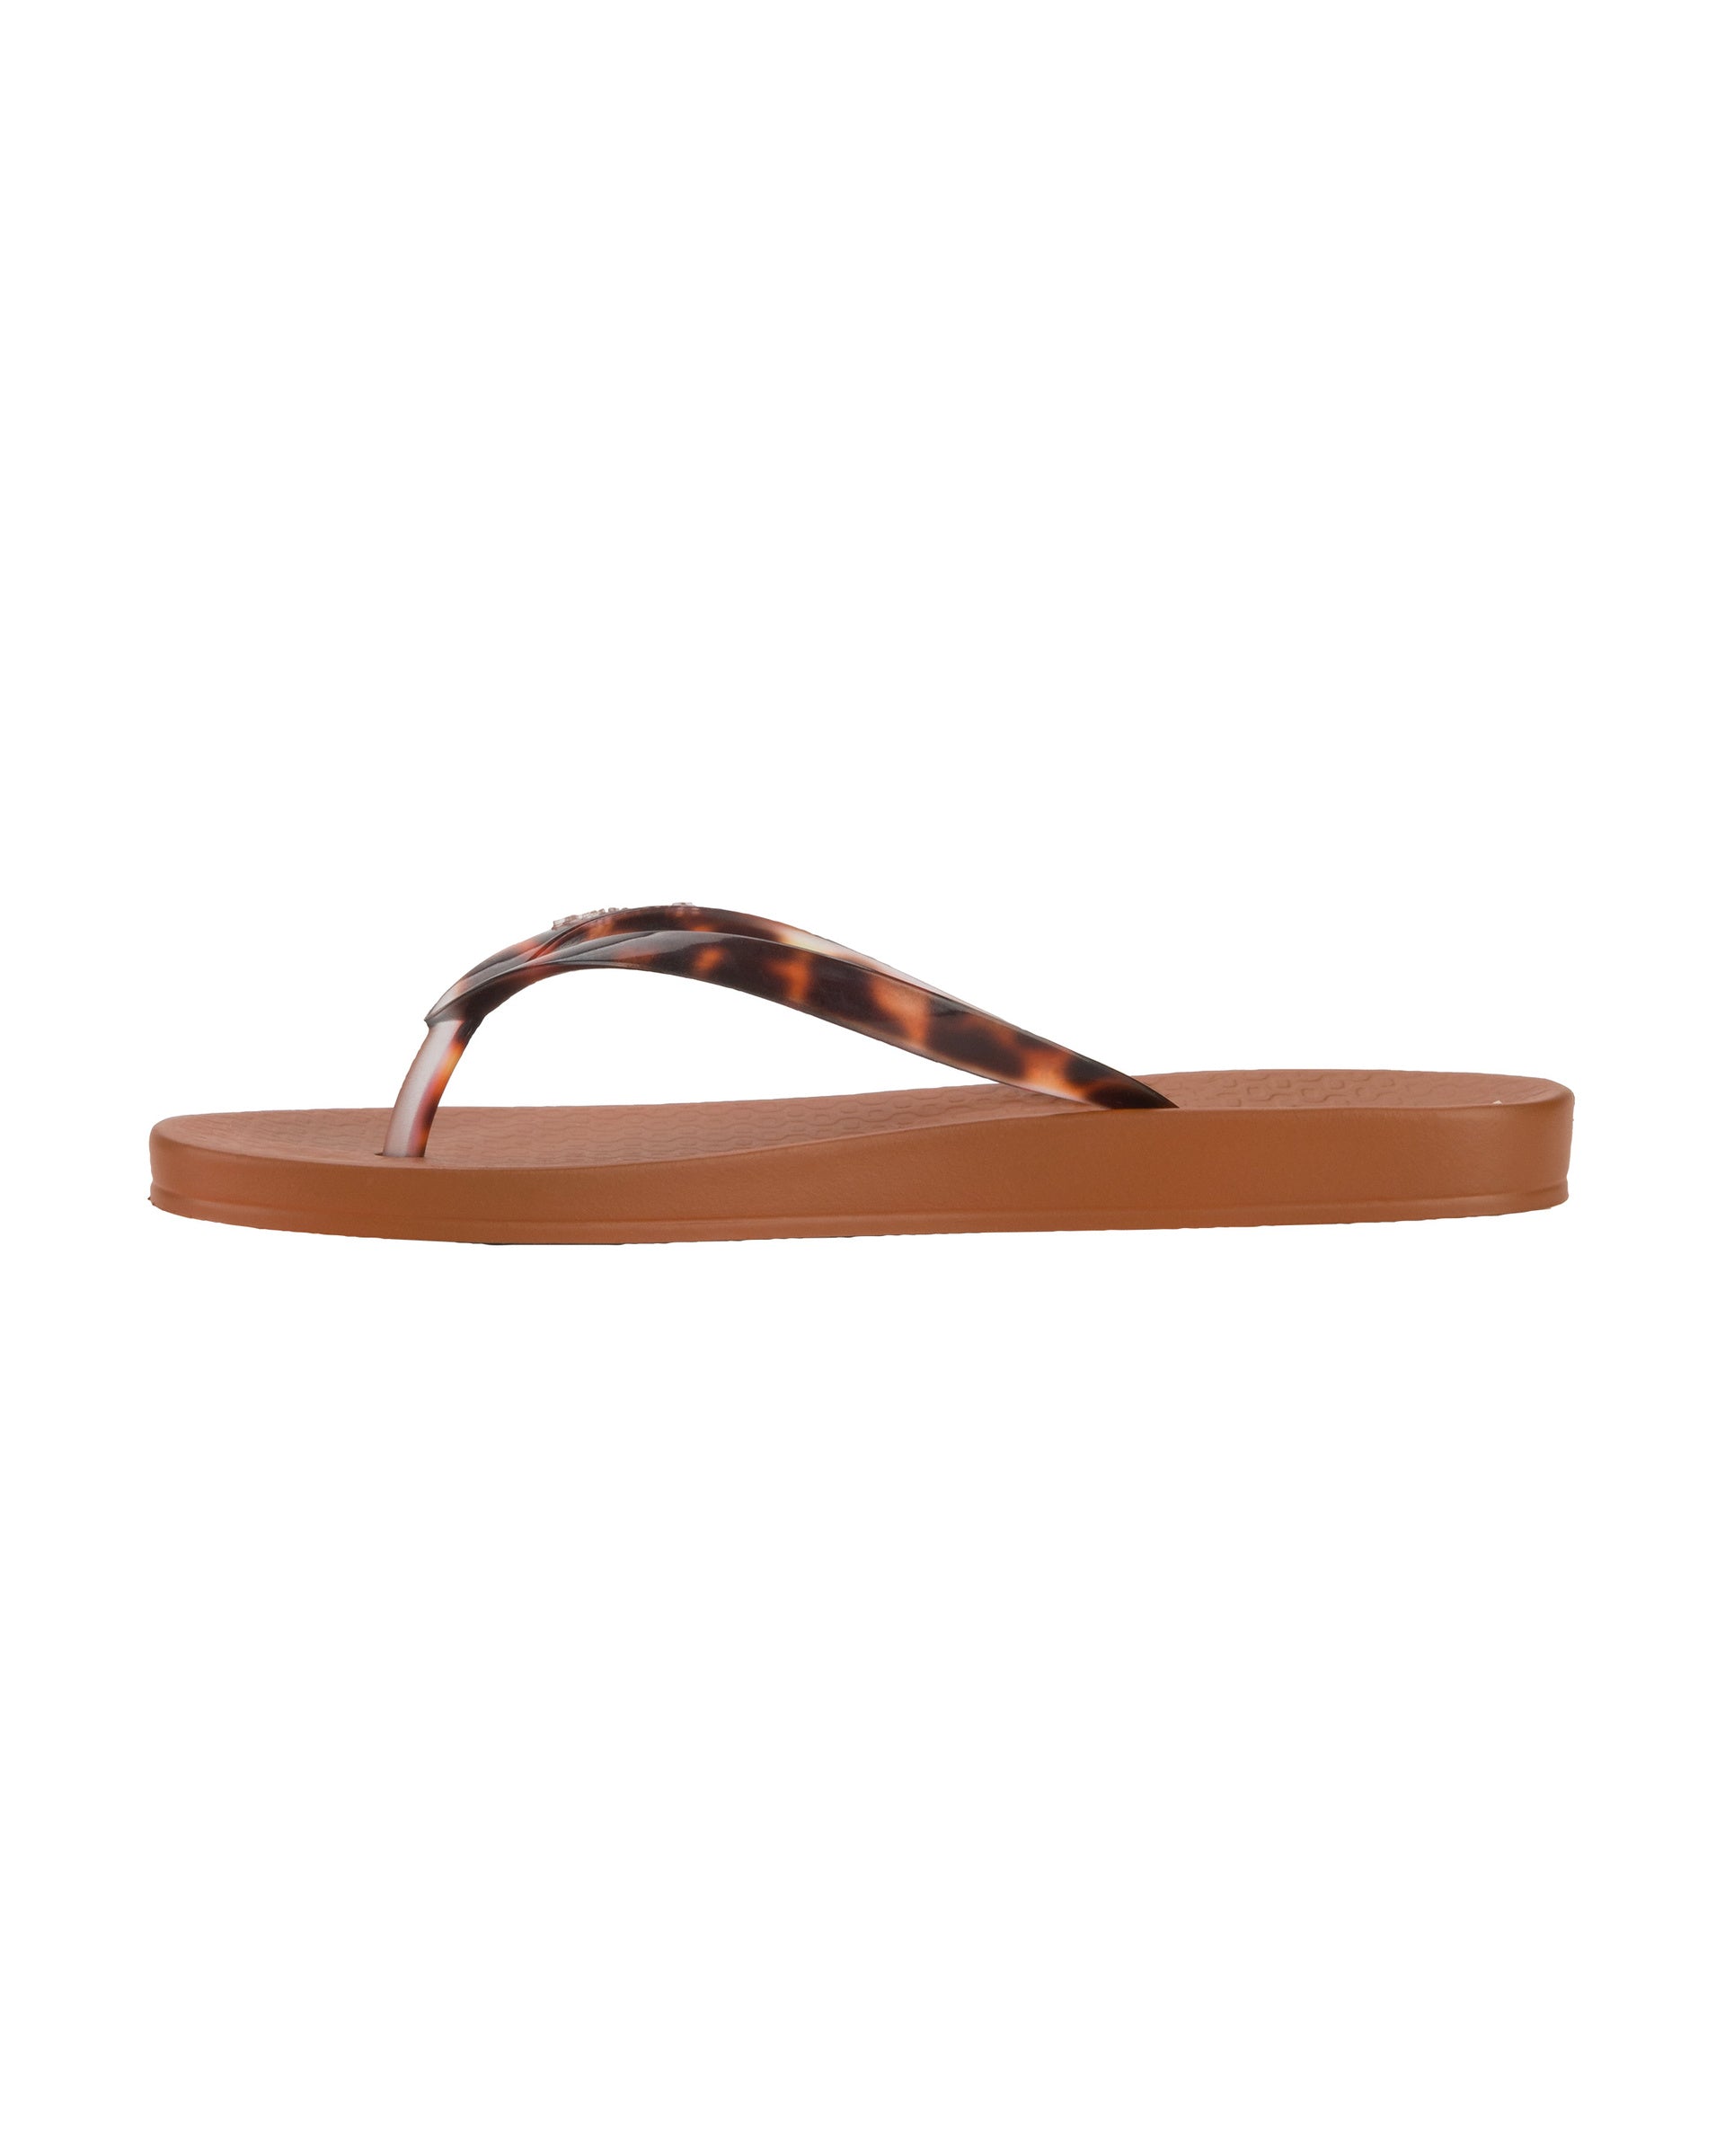 Inner side view of a brown Ipanema Ana Connect women's flip flop with brown tortoiseshell  color strap.